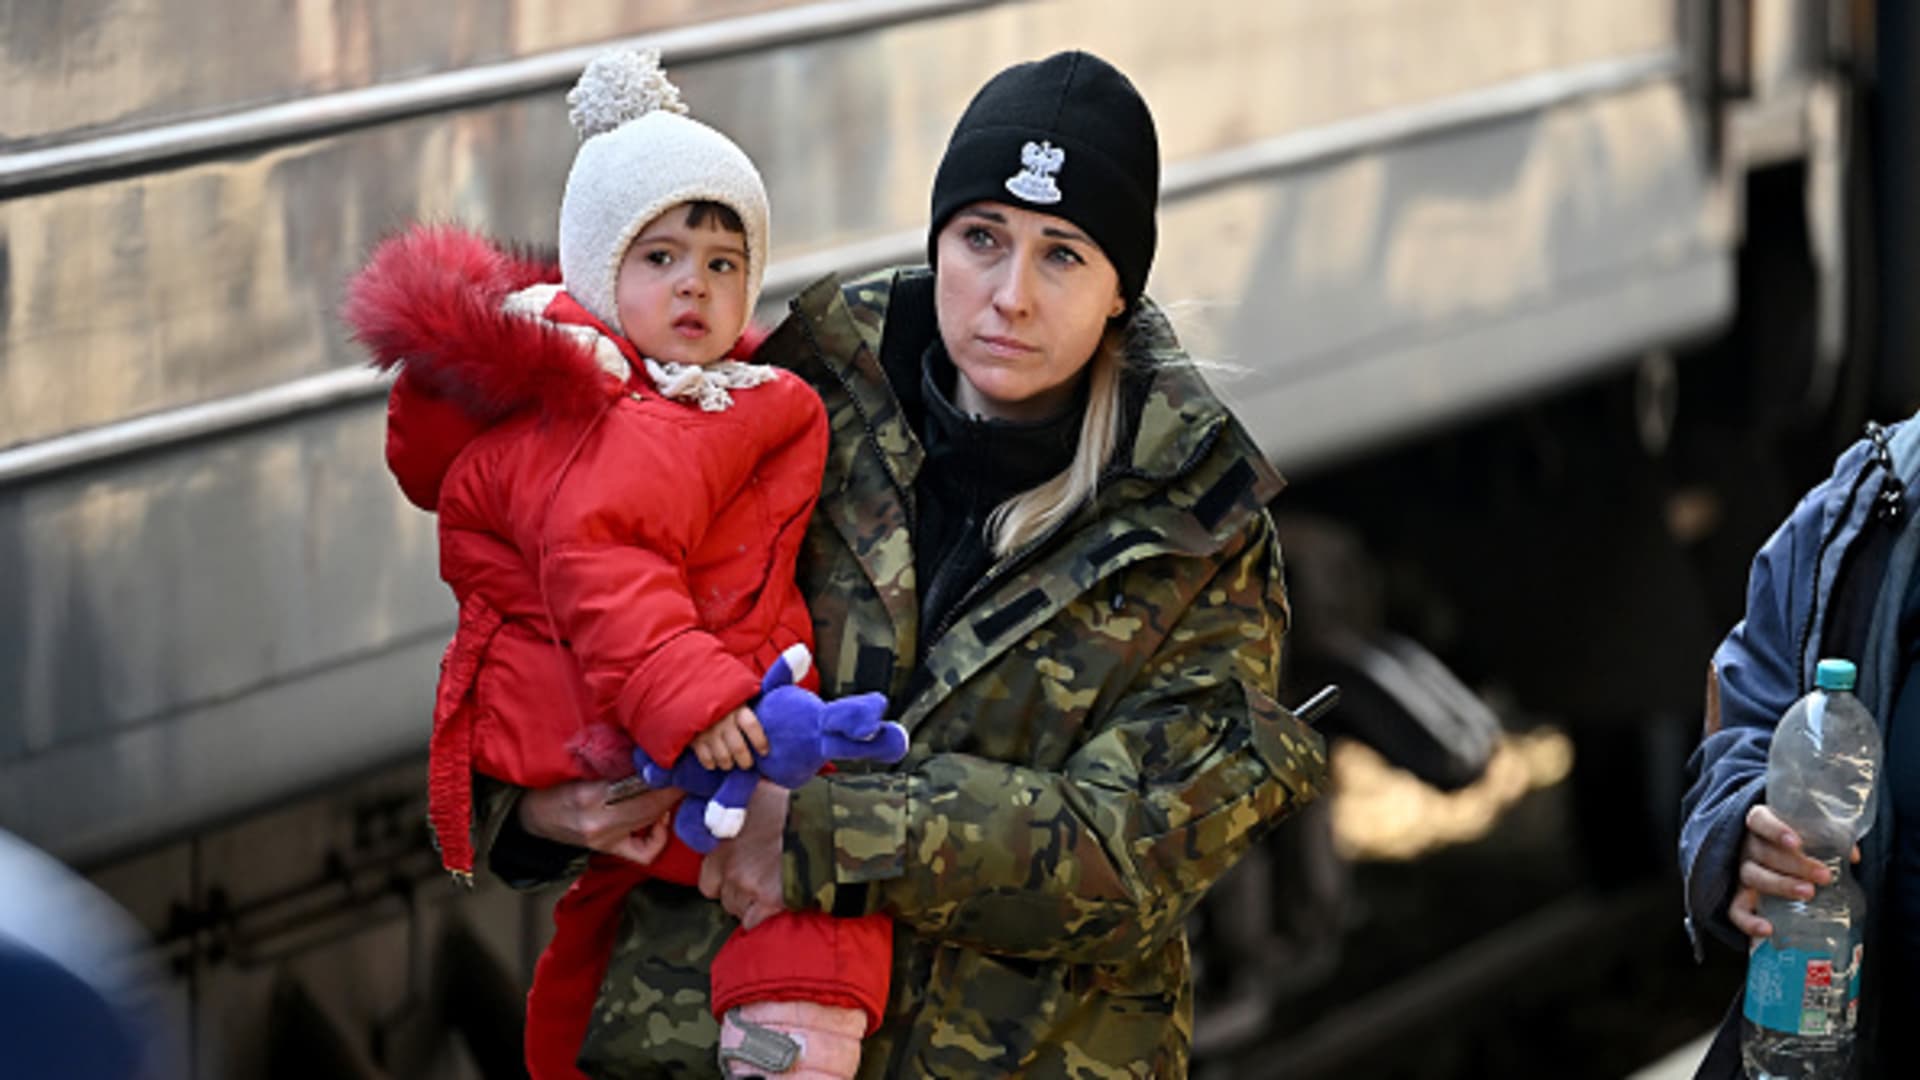 People, mainly women and children, arrive at Przemysl train station on a train which came from Kyiv in war-torn Ukraine on March 20, 2022 in Przemysl, Poland.